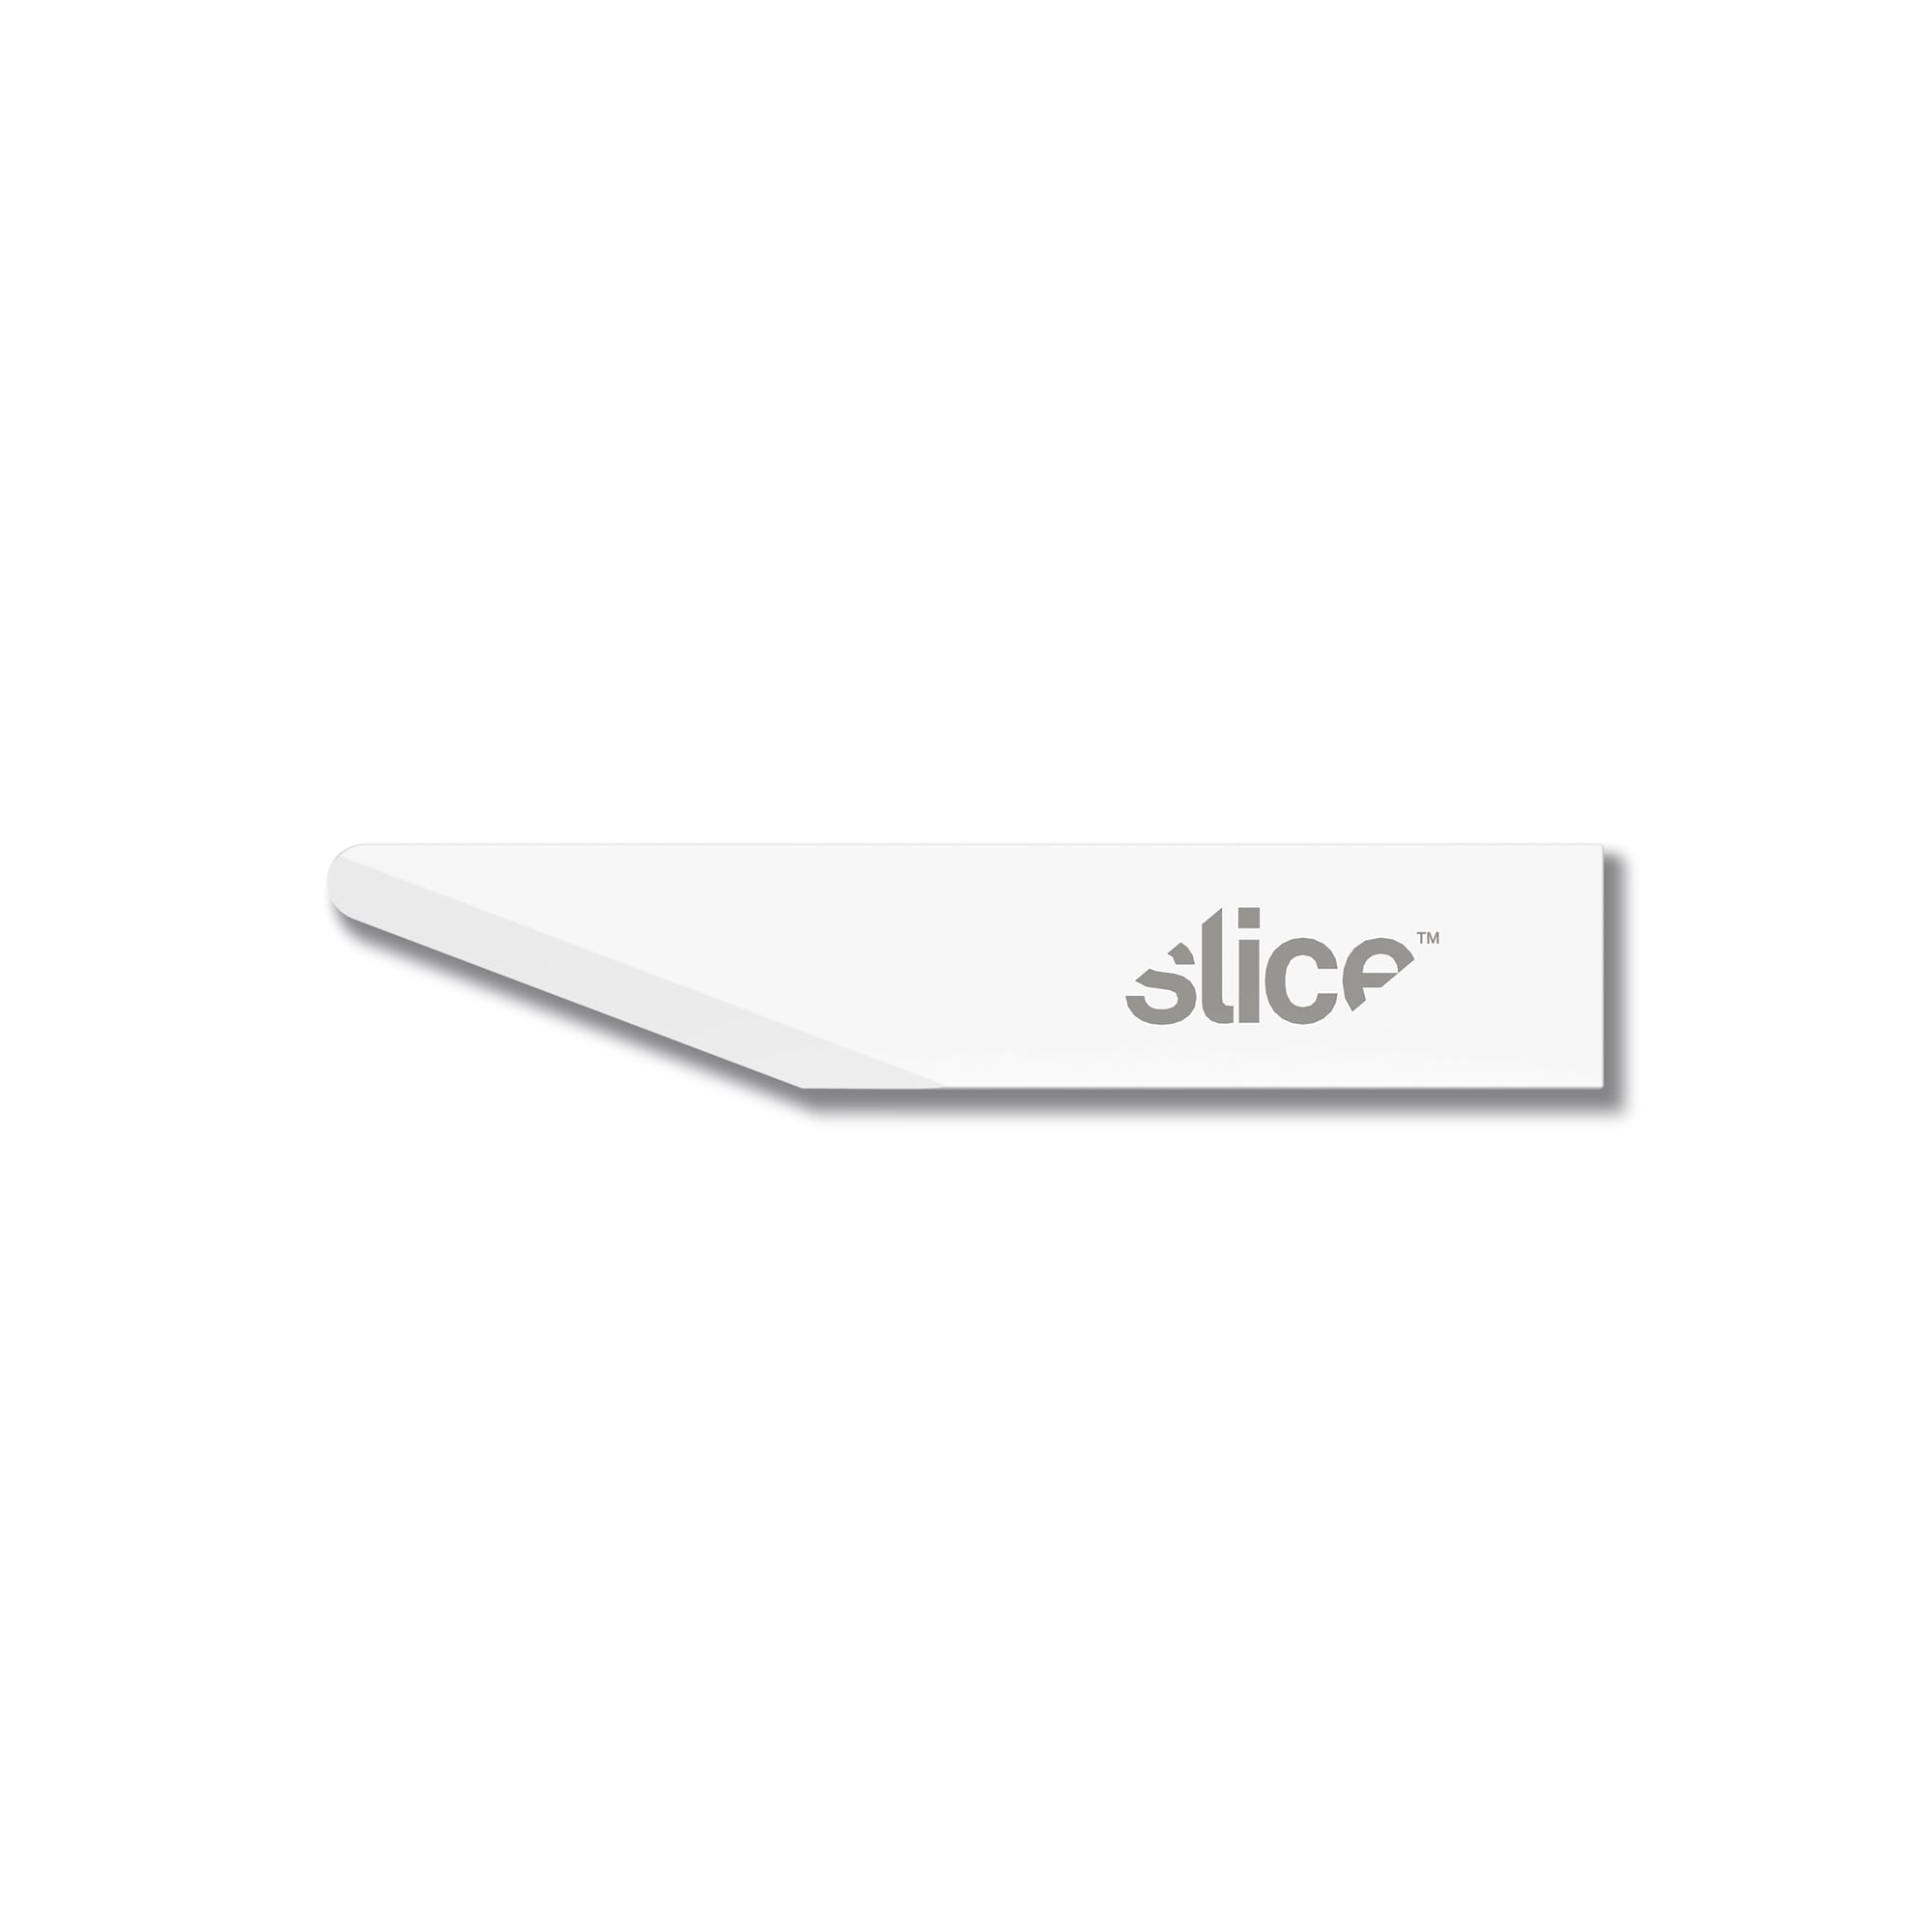 Slice Craft Cutter With Ceramic Blade #10518 Up To 11x Longer Lasting New